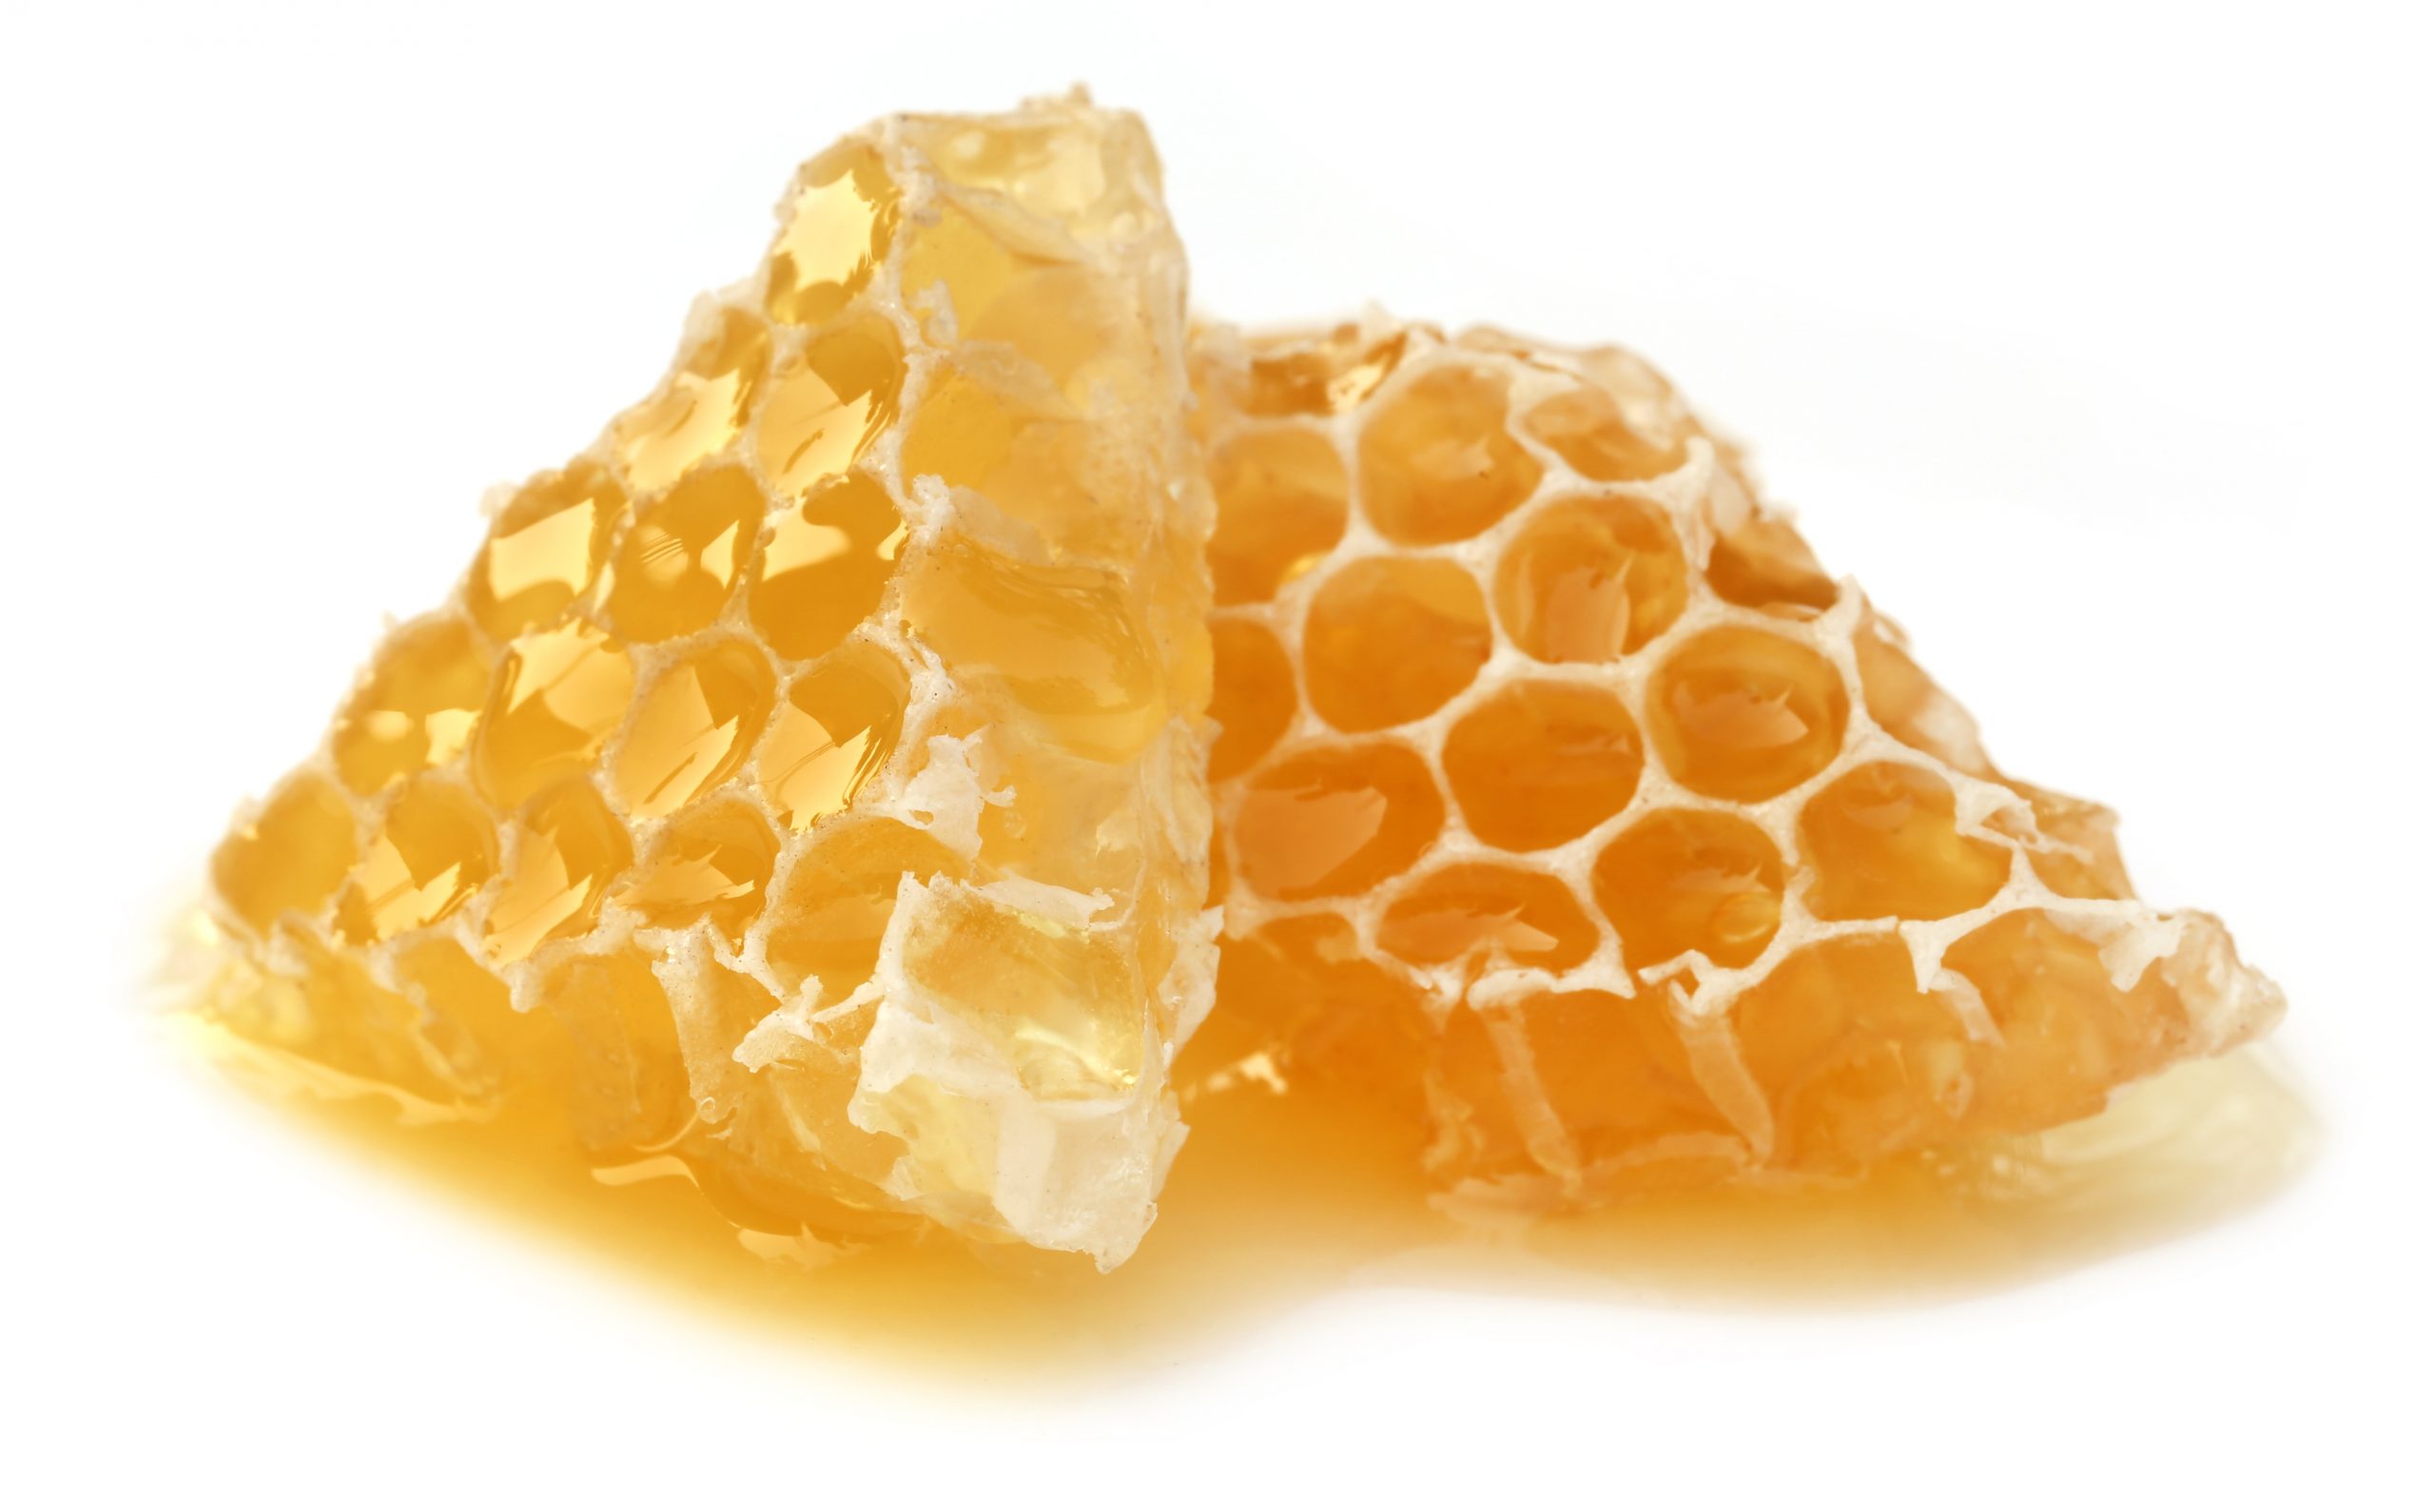 China’s Impact on the Honey Industry